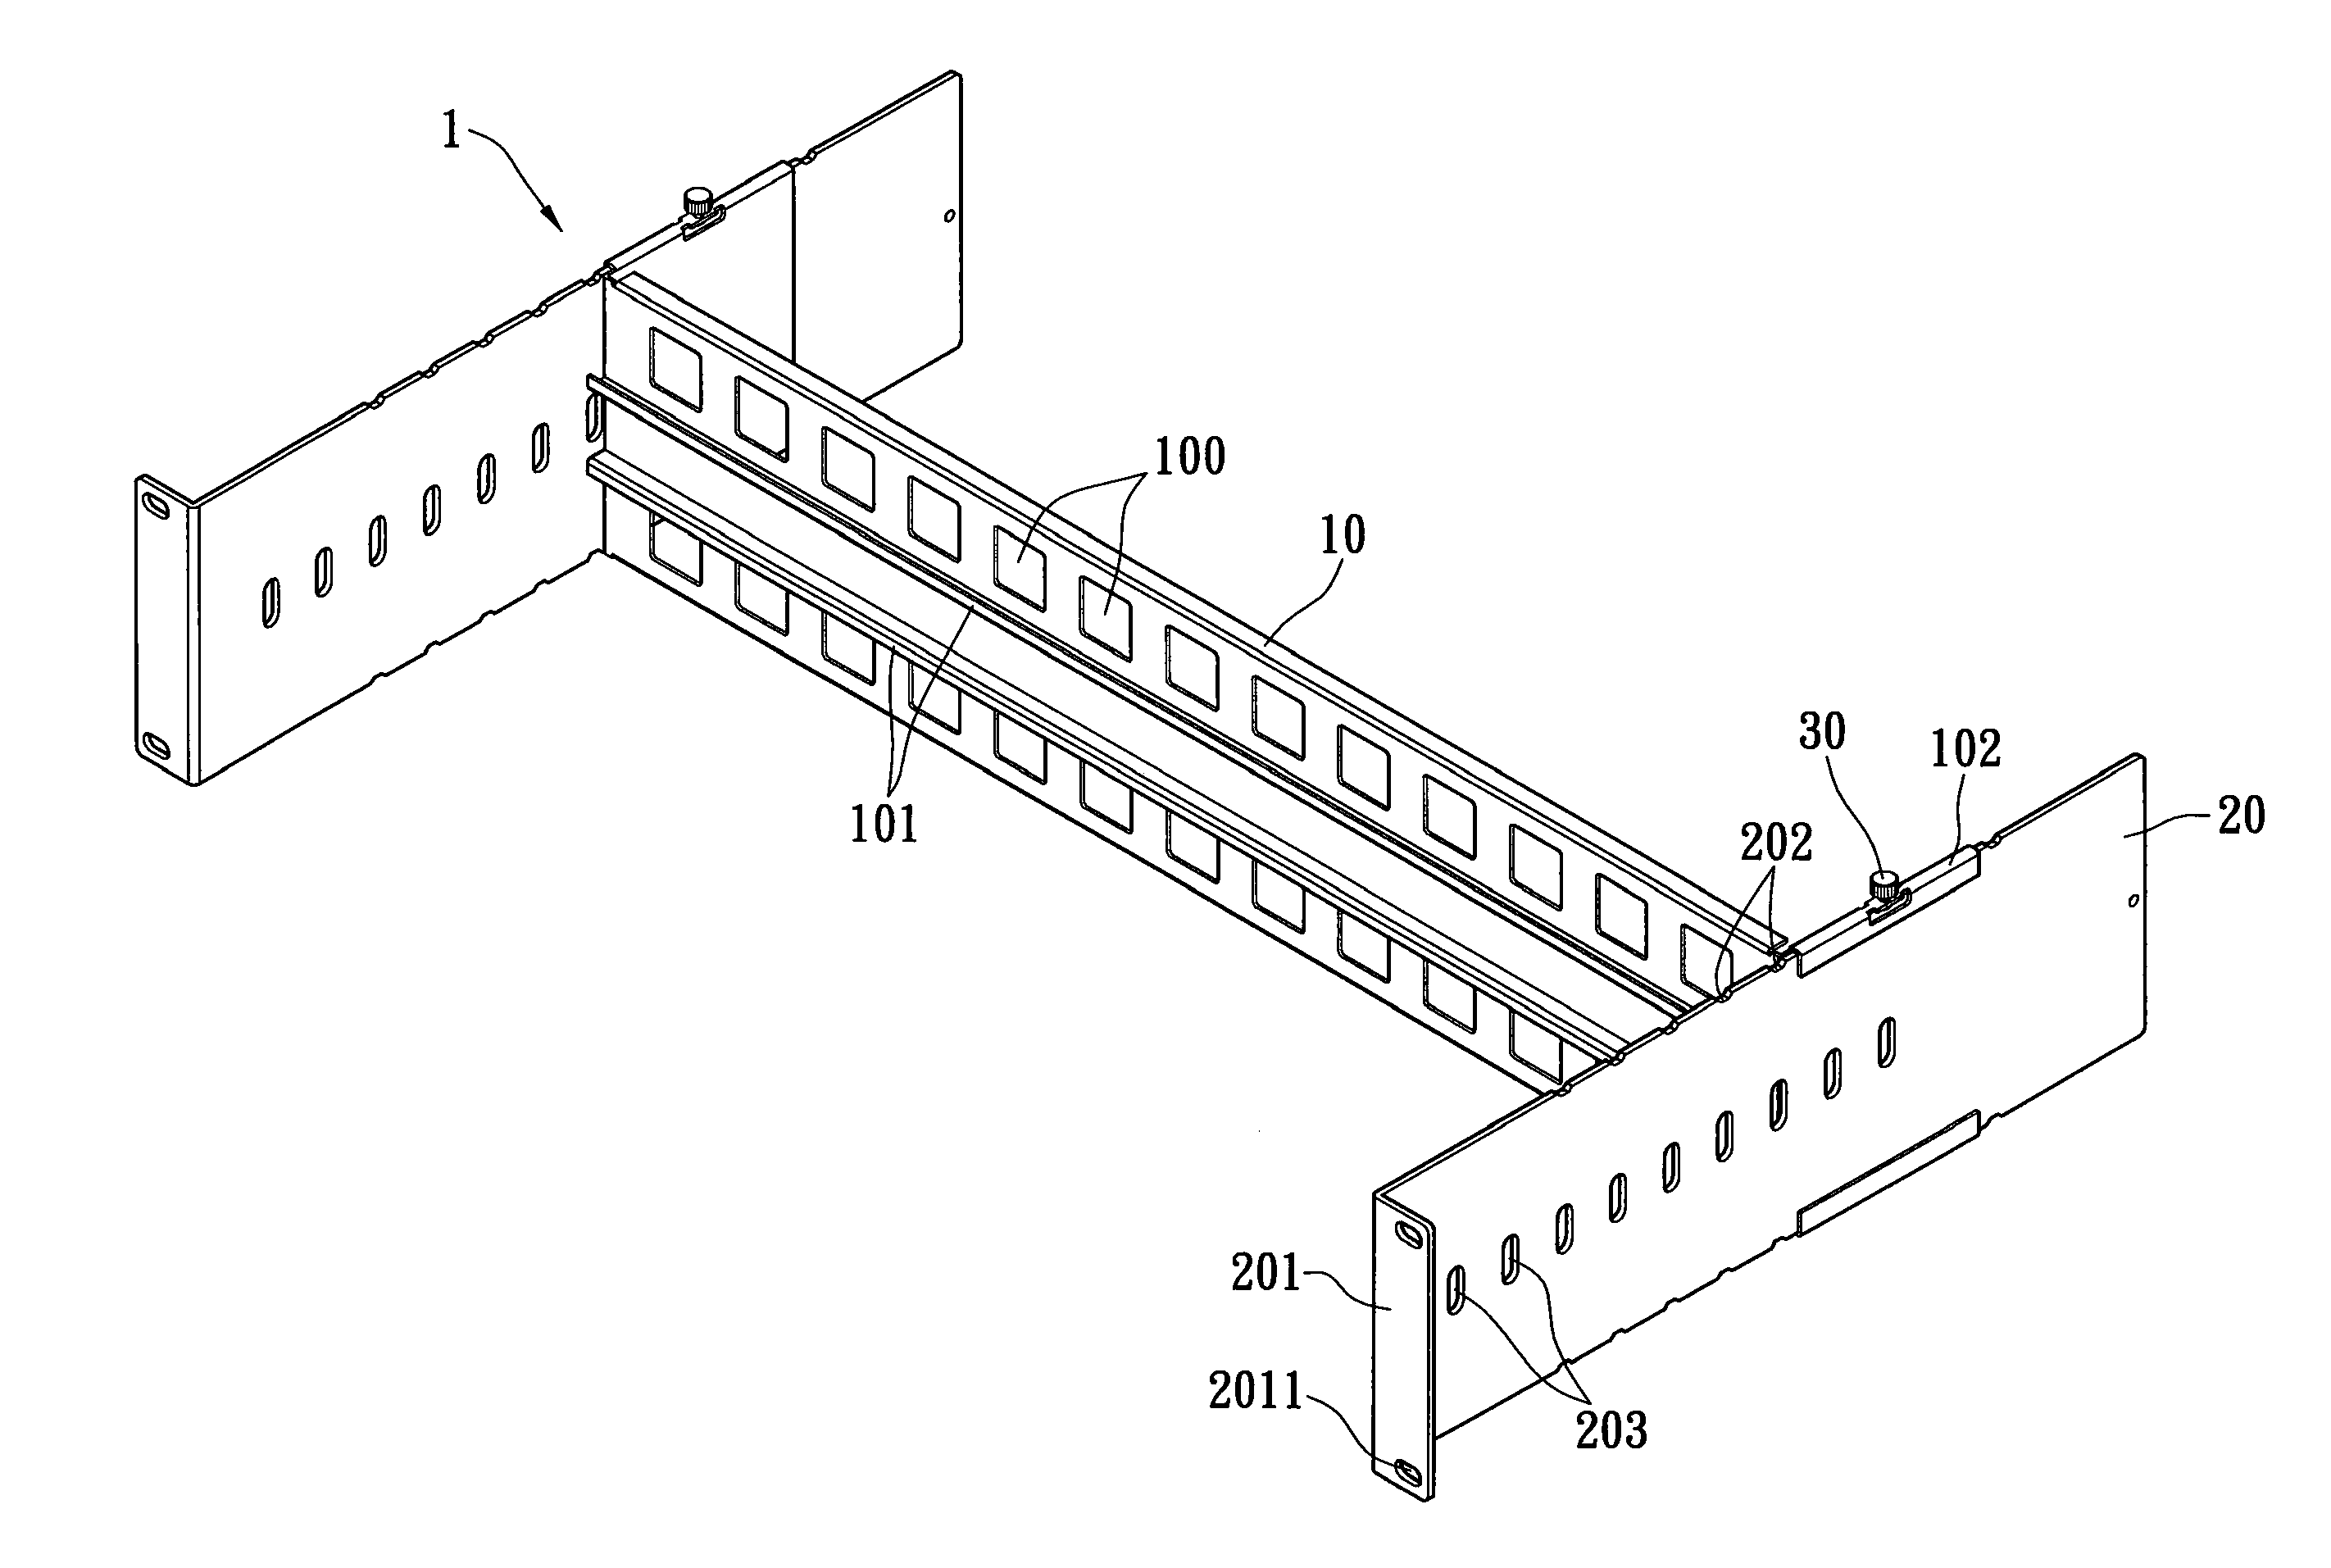 Adjustable housing frame with industrial rails for adjusting the depth of communication apparatus within a housing cabinet